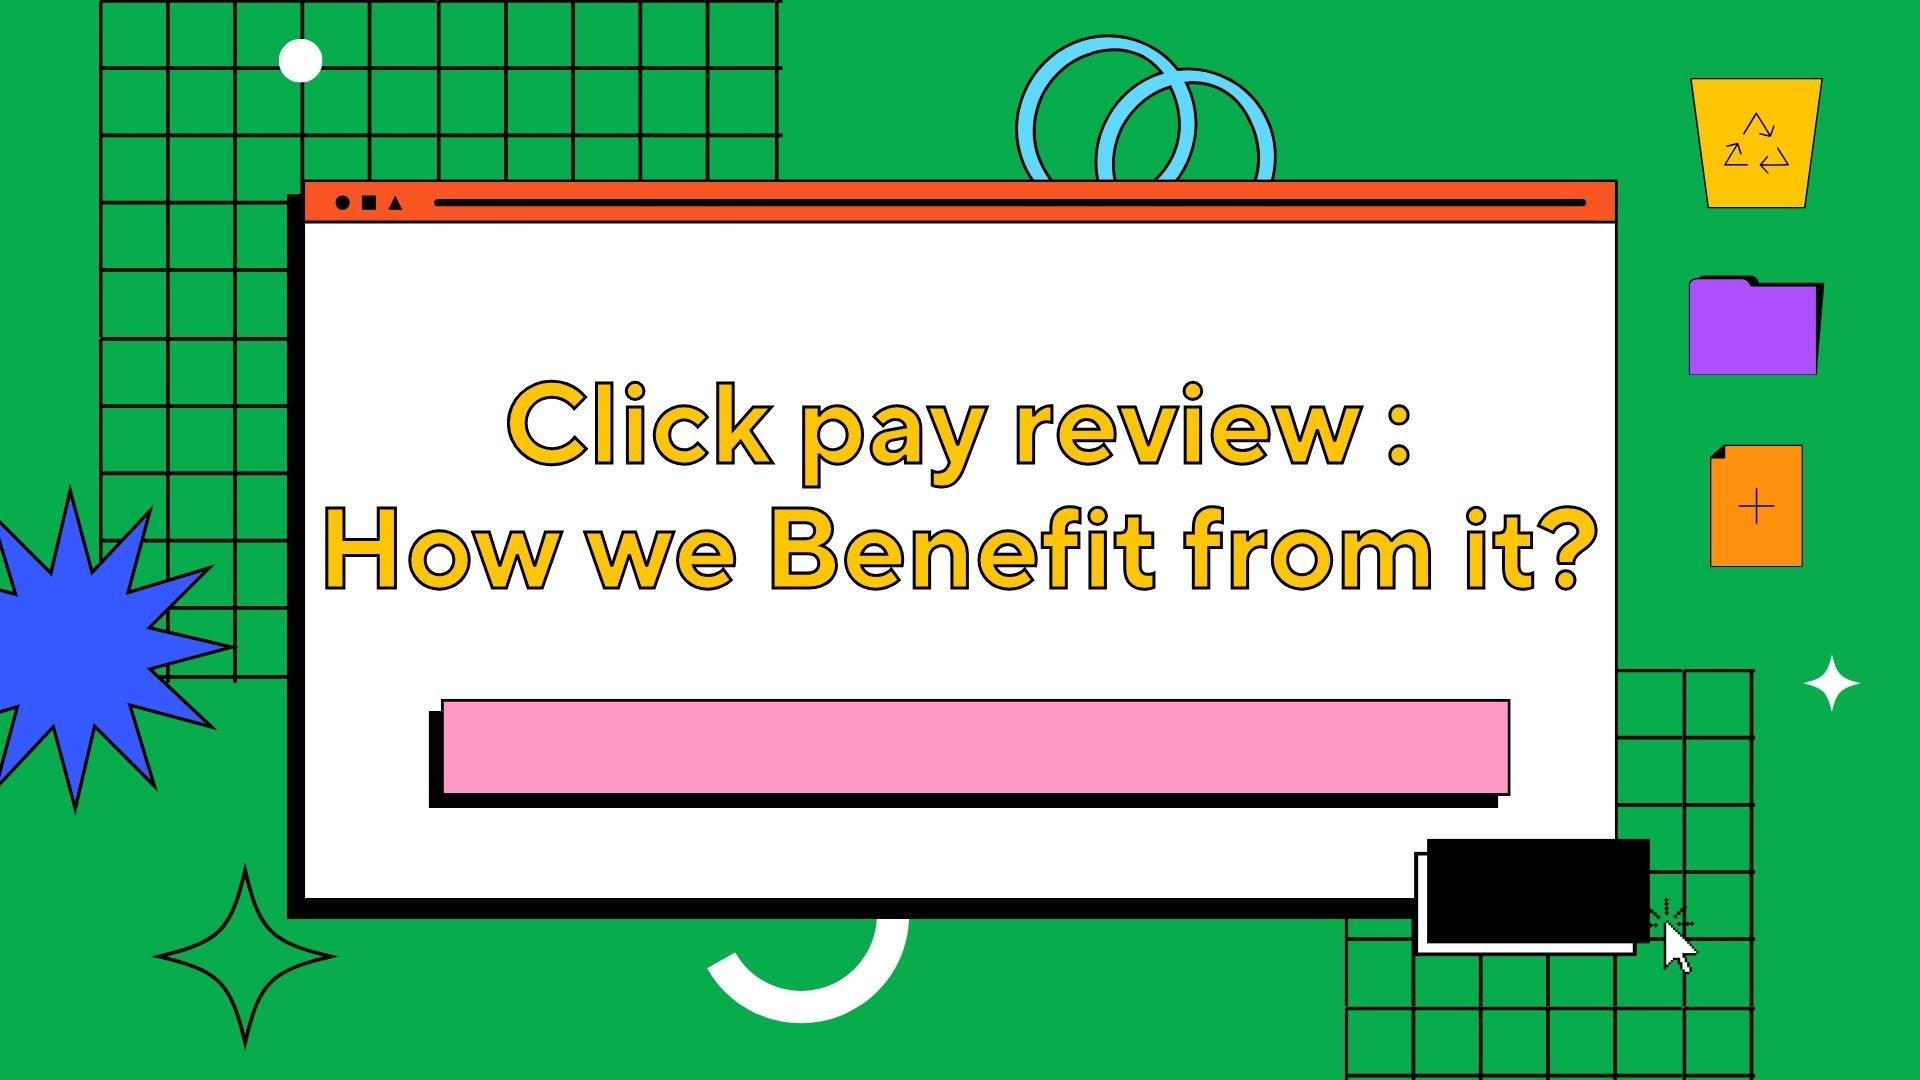 Click pay review : How we Benefit from it?